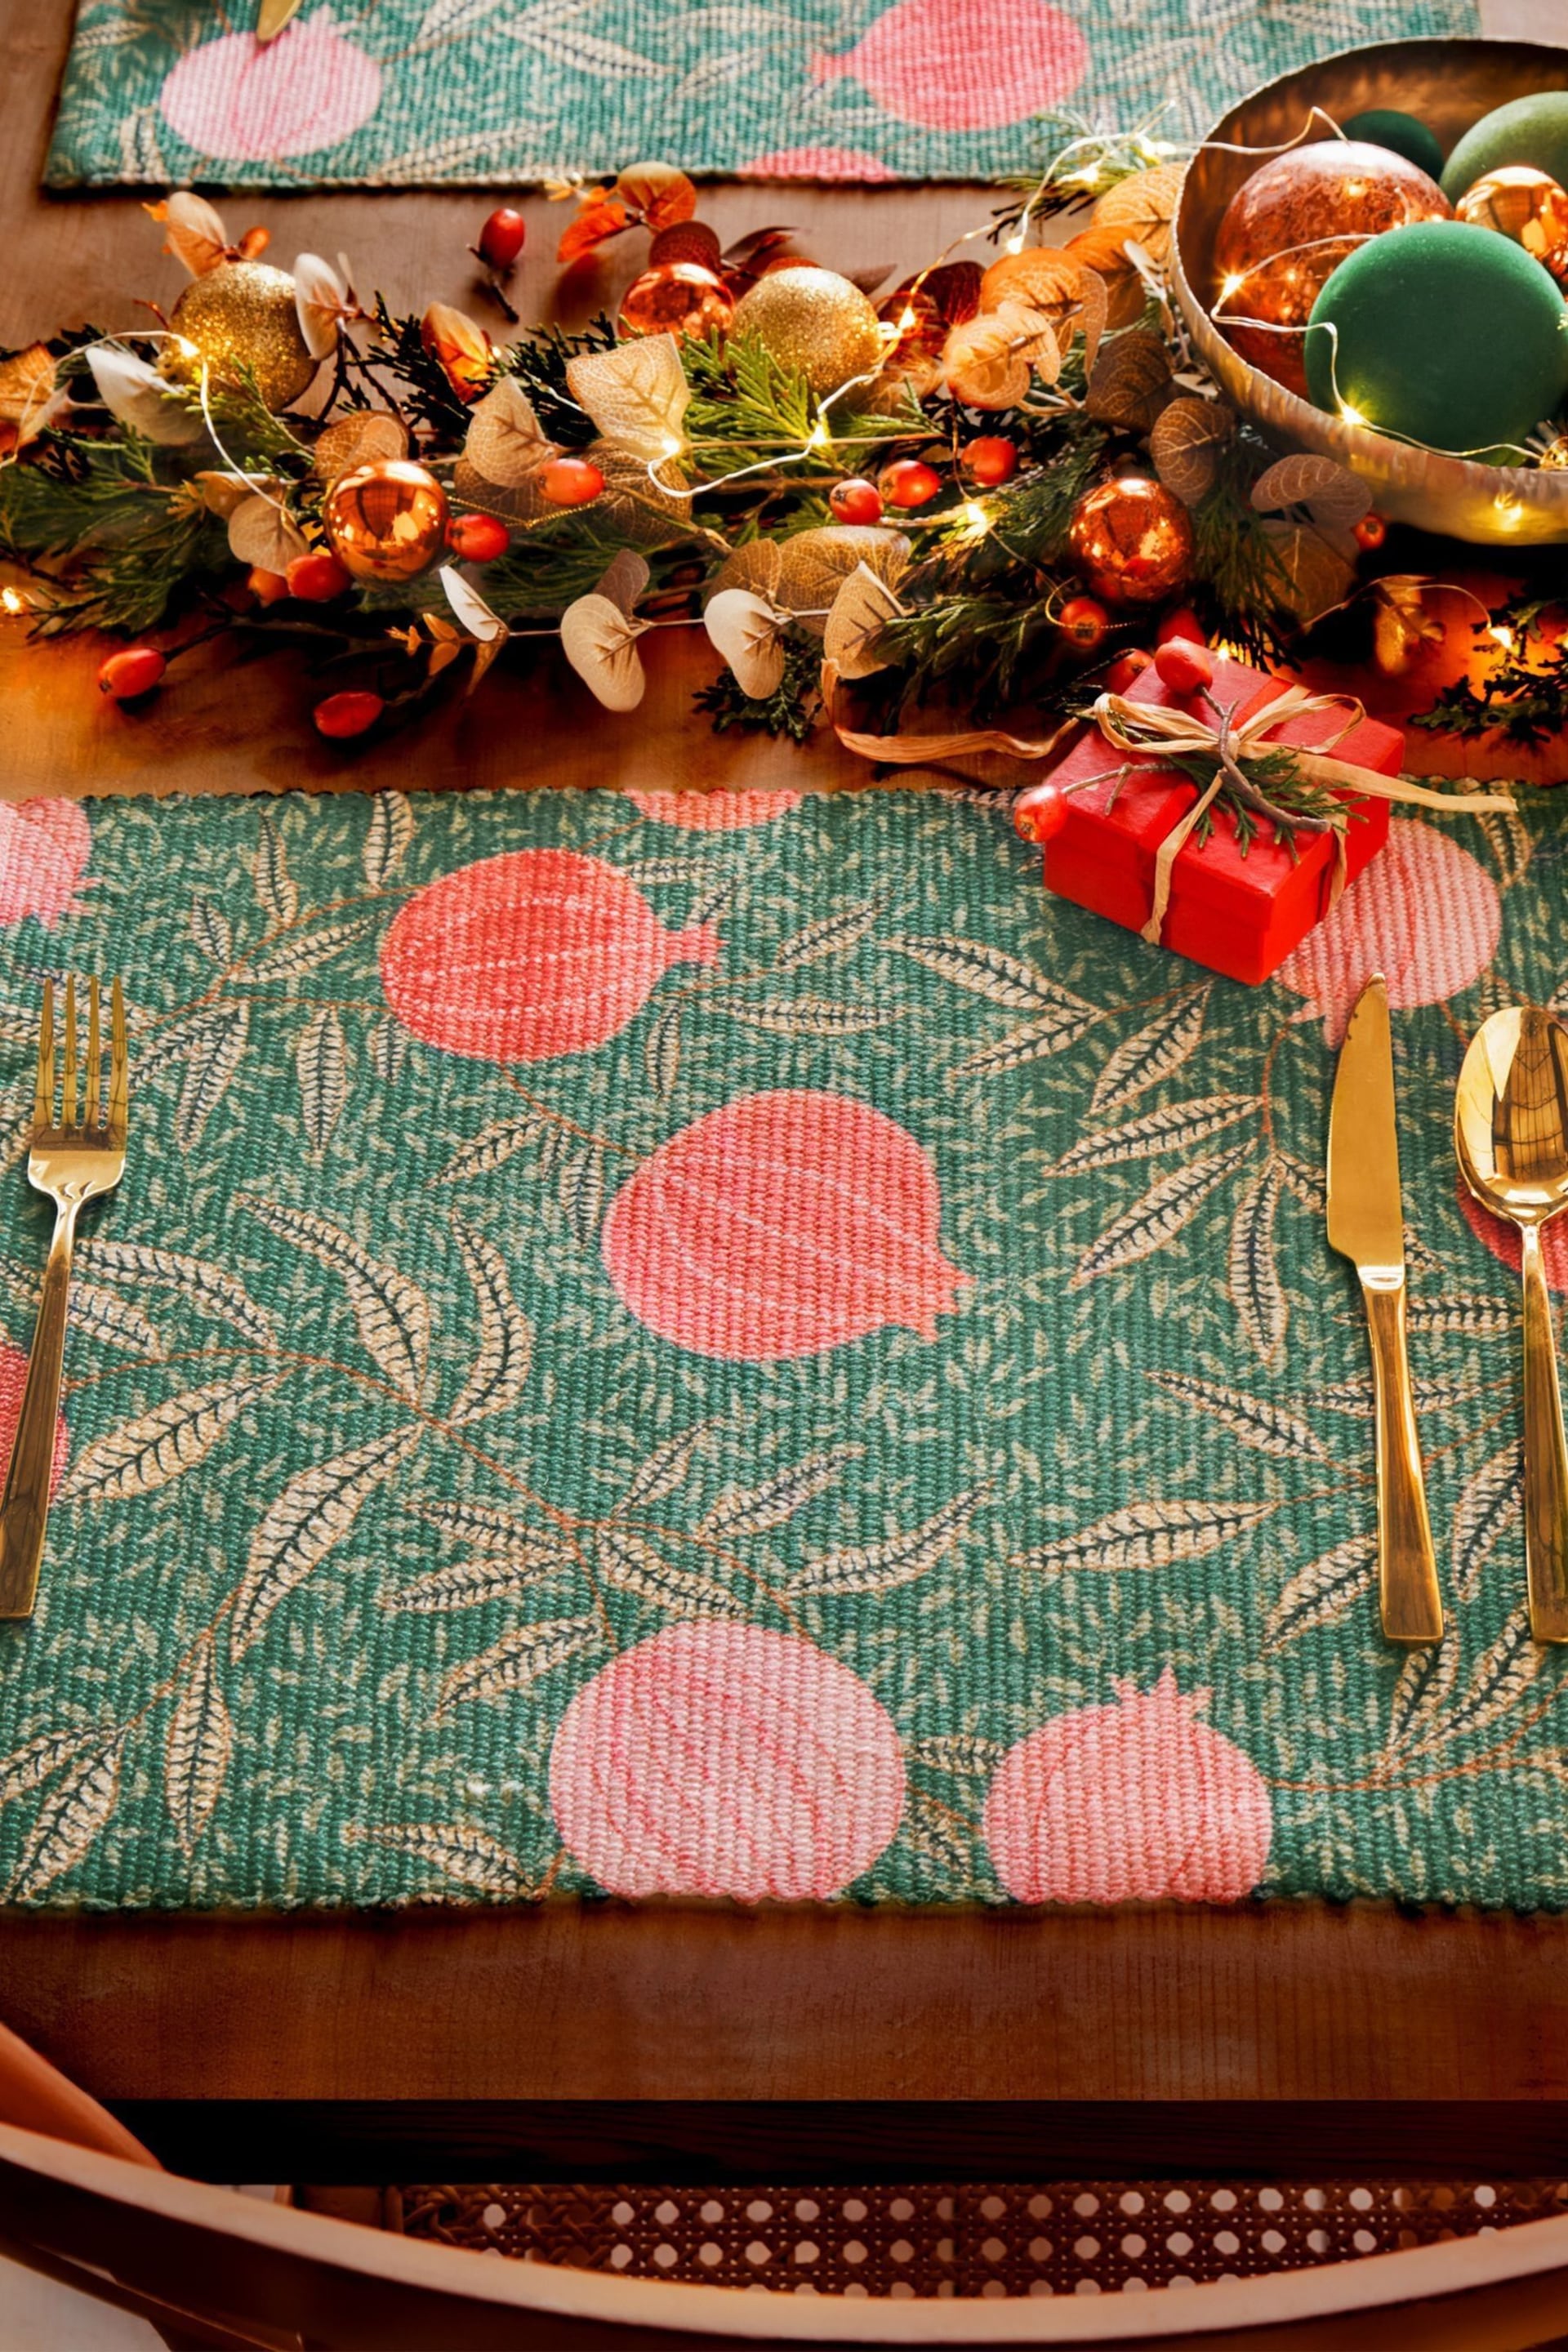 Paoletti Set of 4 Green Pomegranate Table Placemats - Image 2 of 6